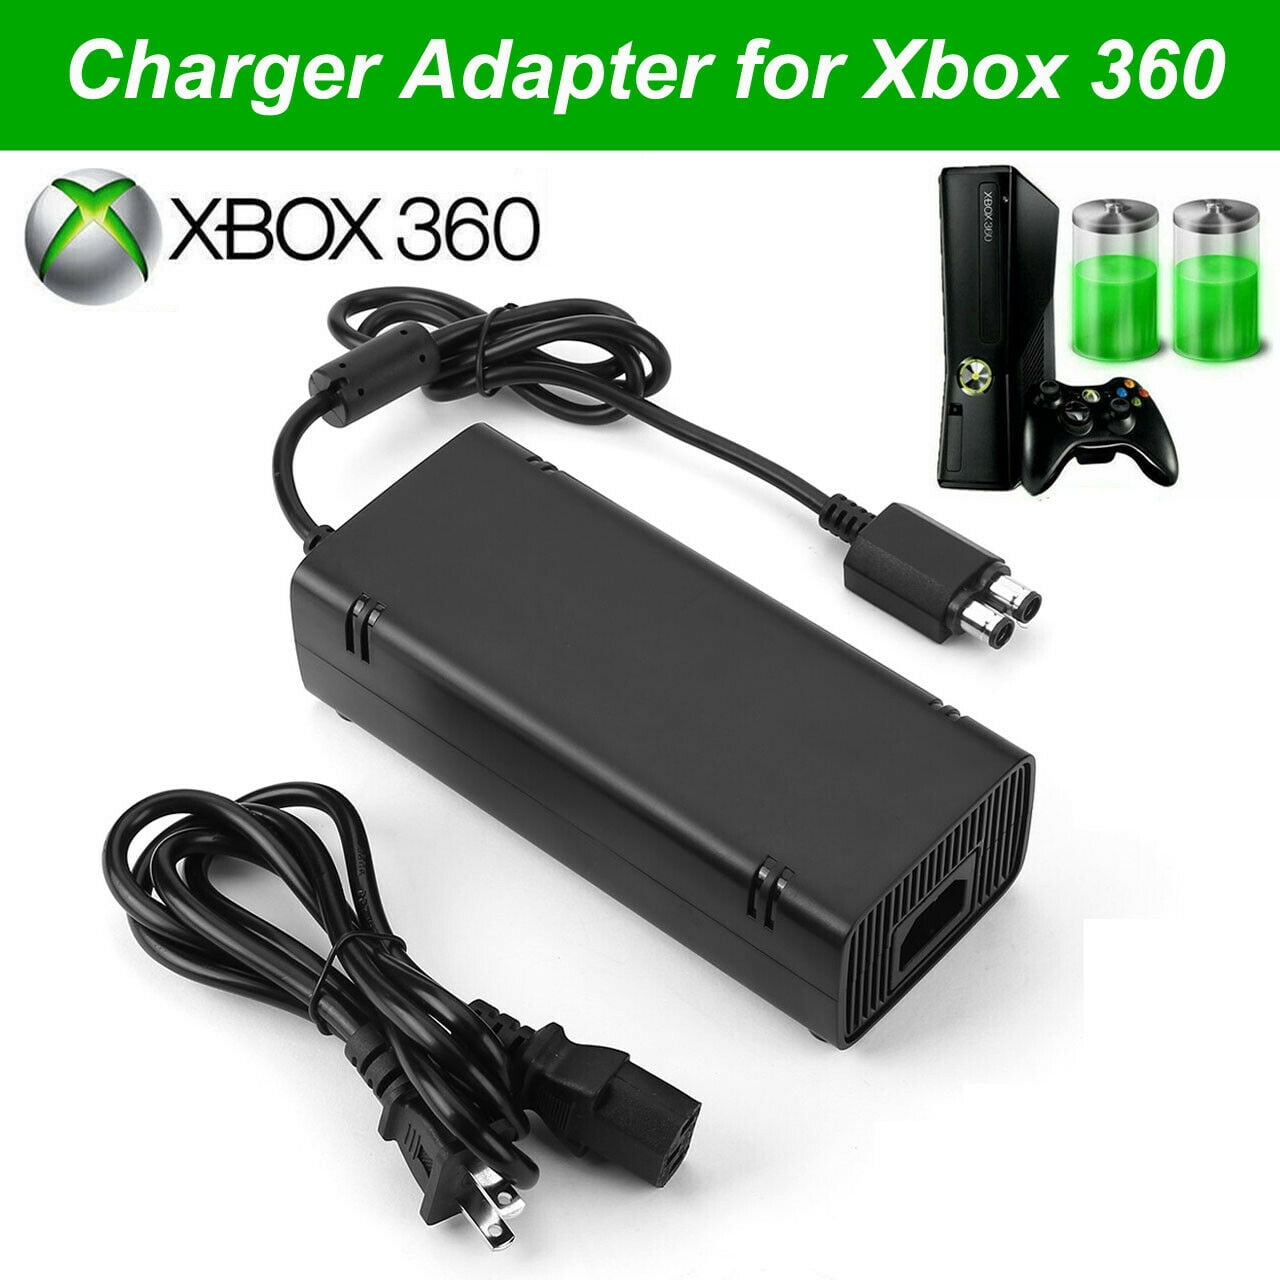 NEW AC Power Cord Cable Outlet Plug For MICROSOFT XBOX 360 BRICK ADAPTER CHARGER 